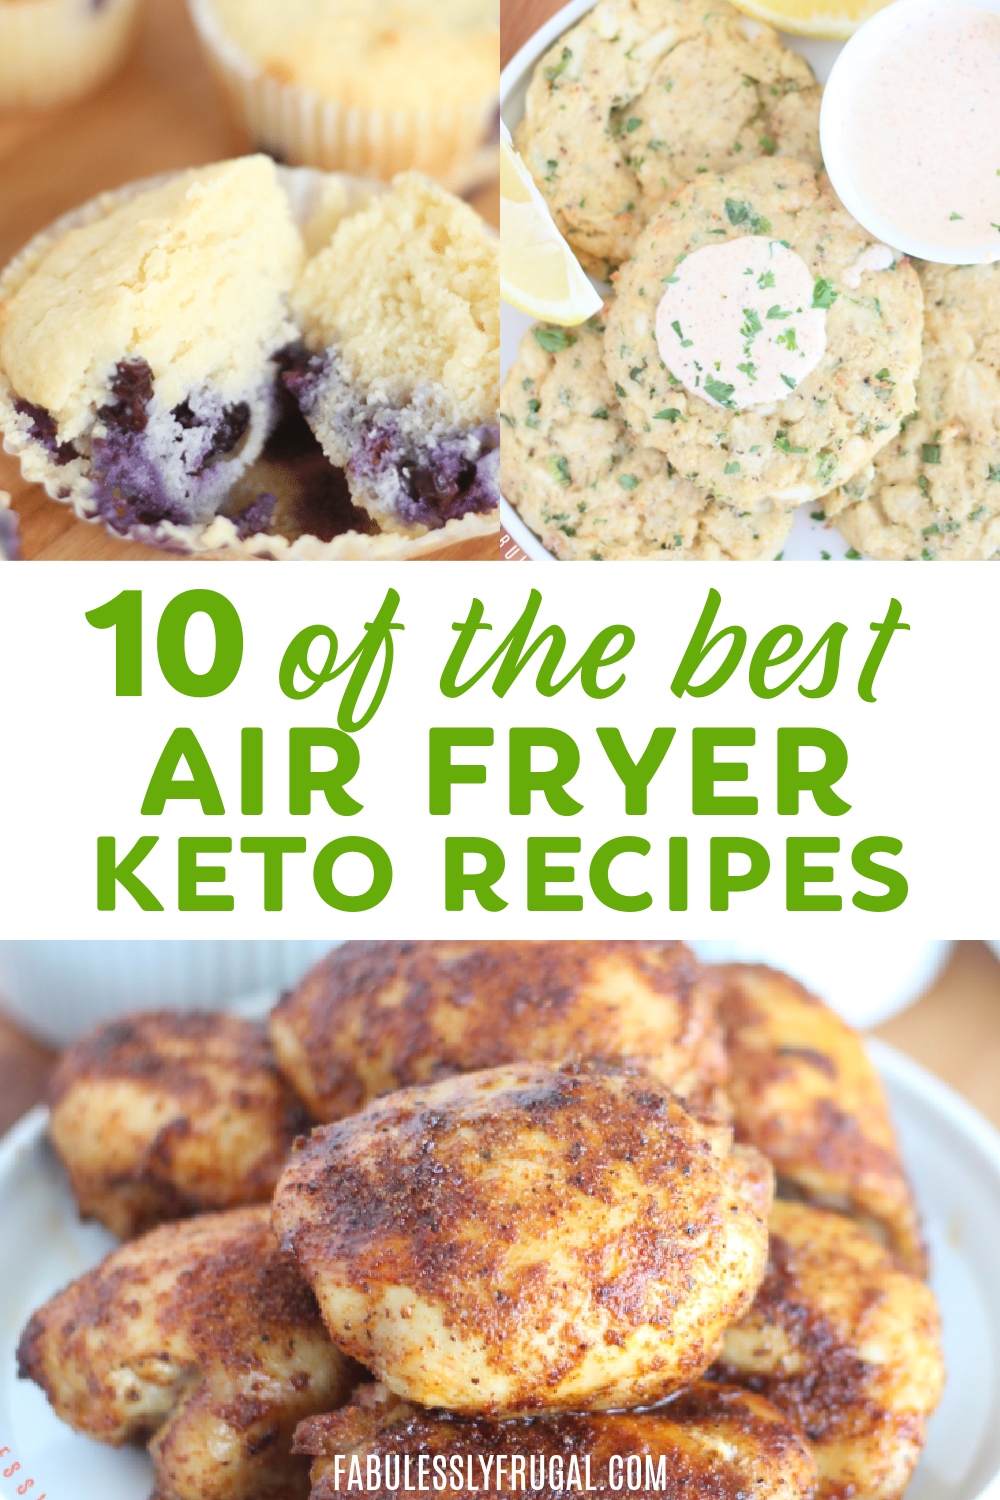 10 air fryer recipes that are keto, low-carb, and tasty!